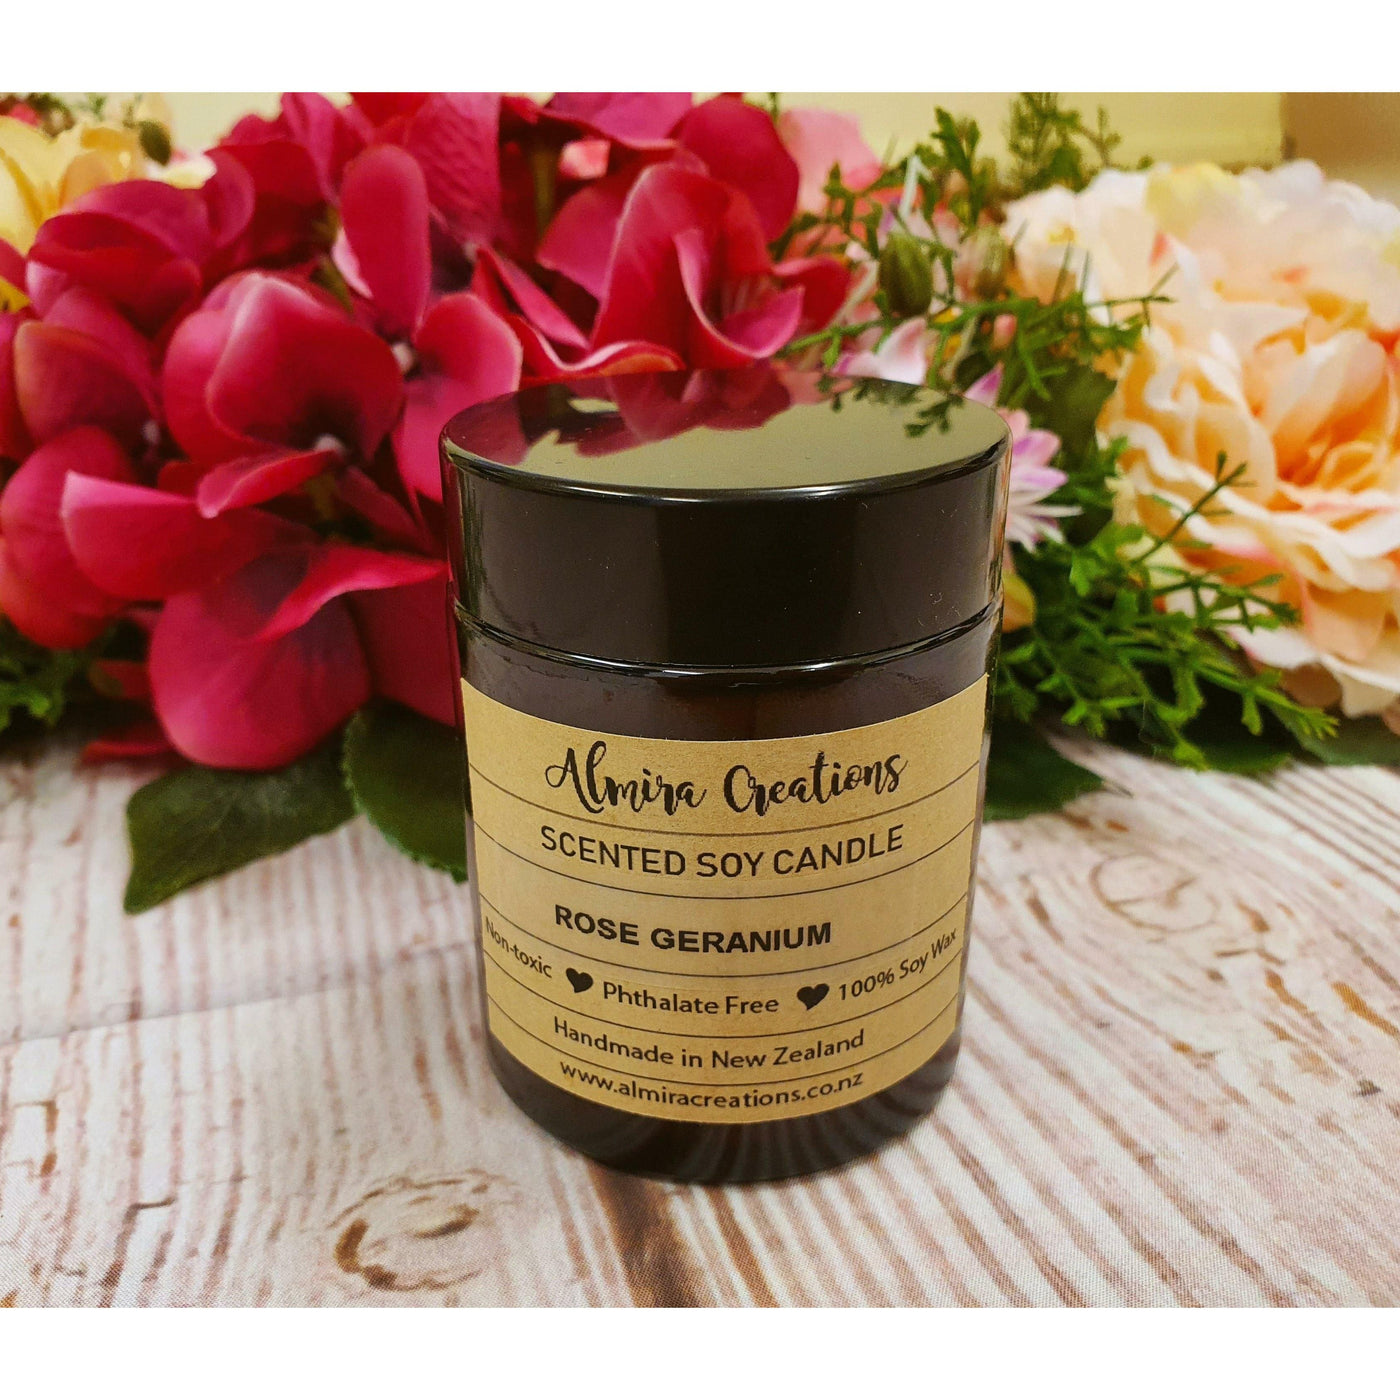 Rose Geranium - Scented Soy Candle - Almira Creations